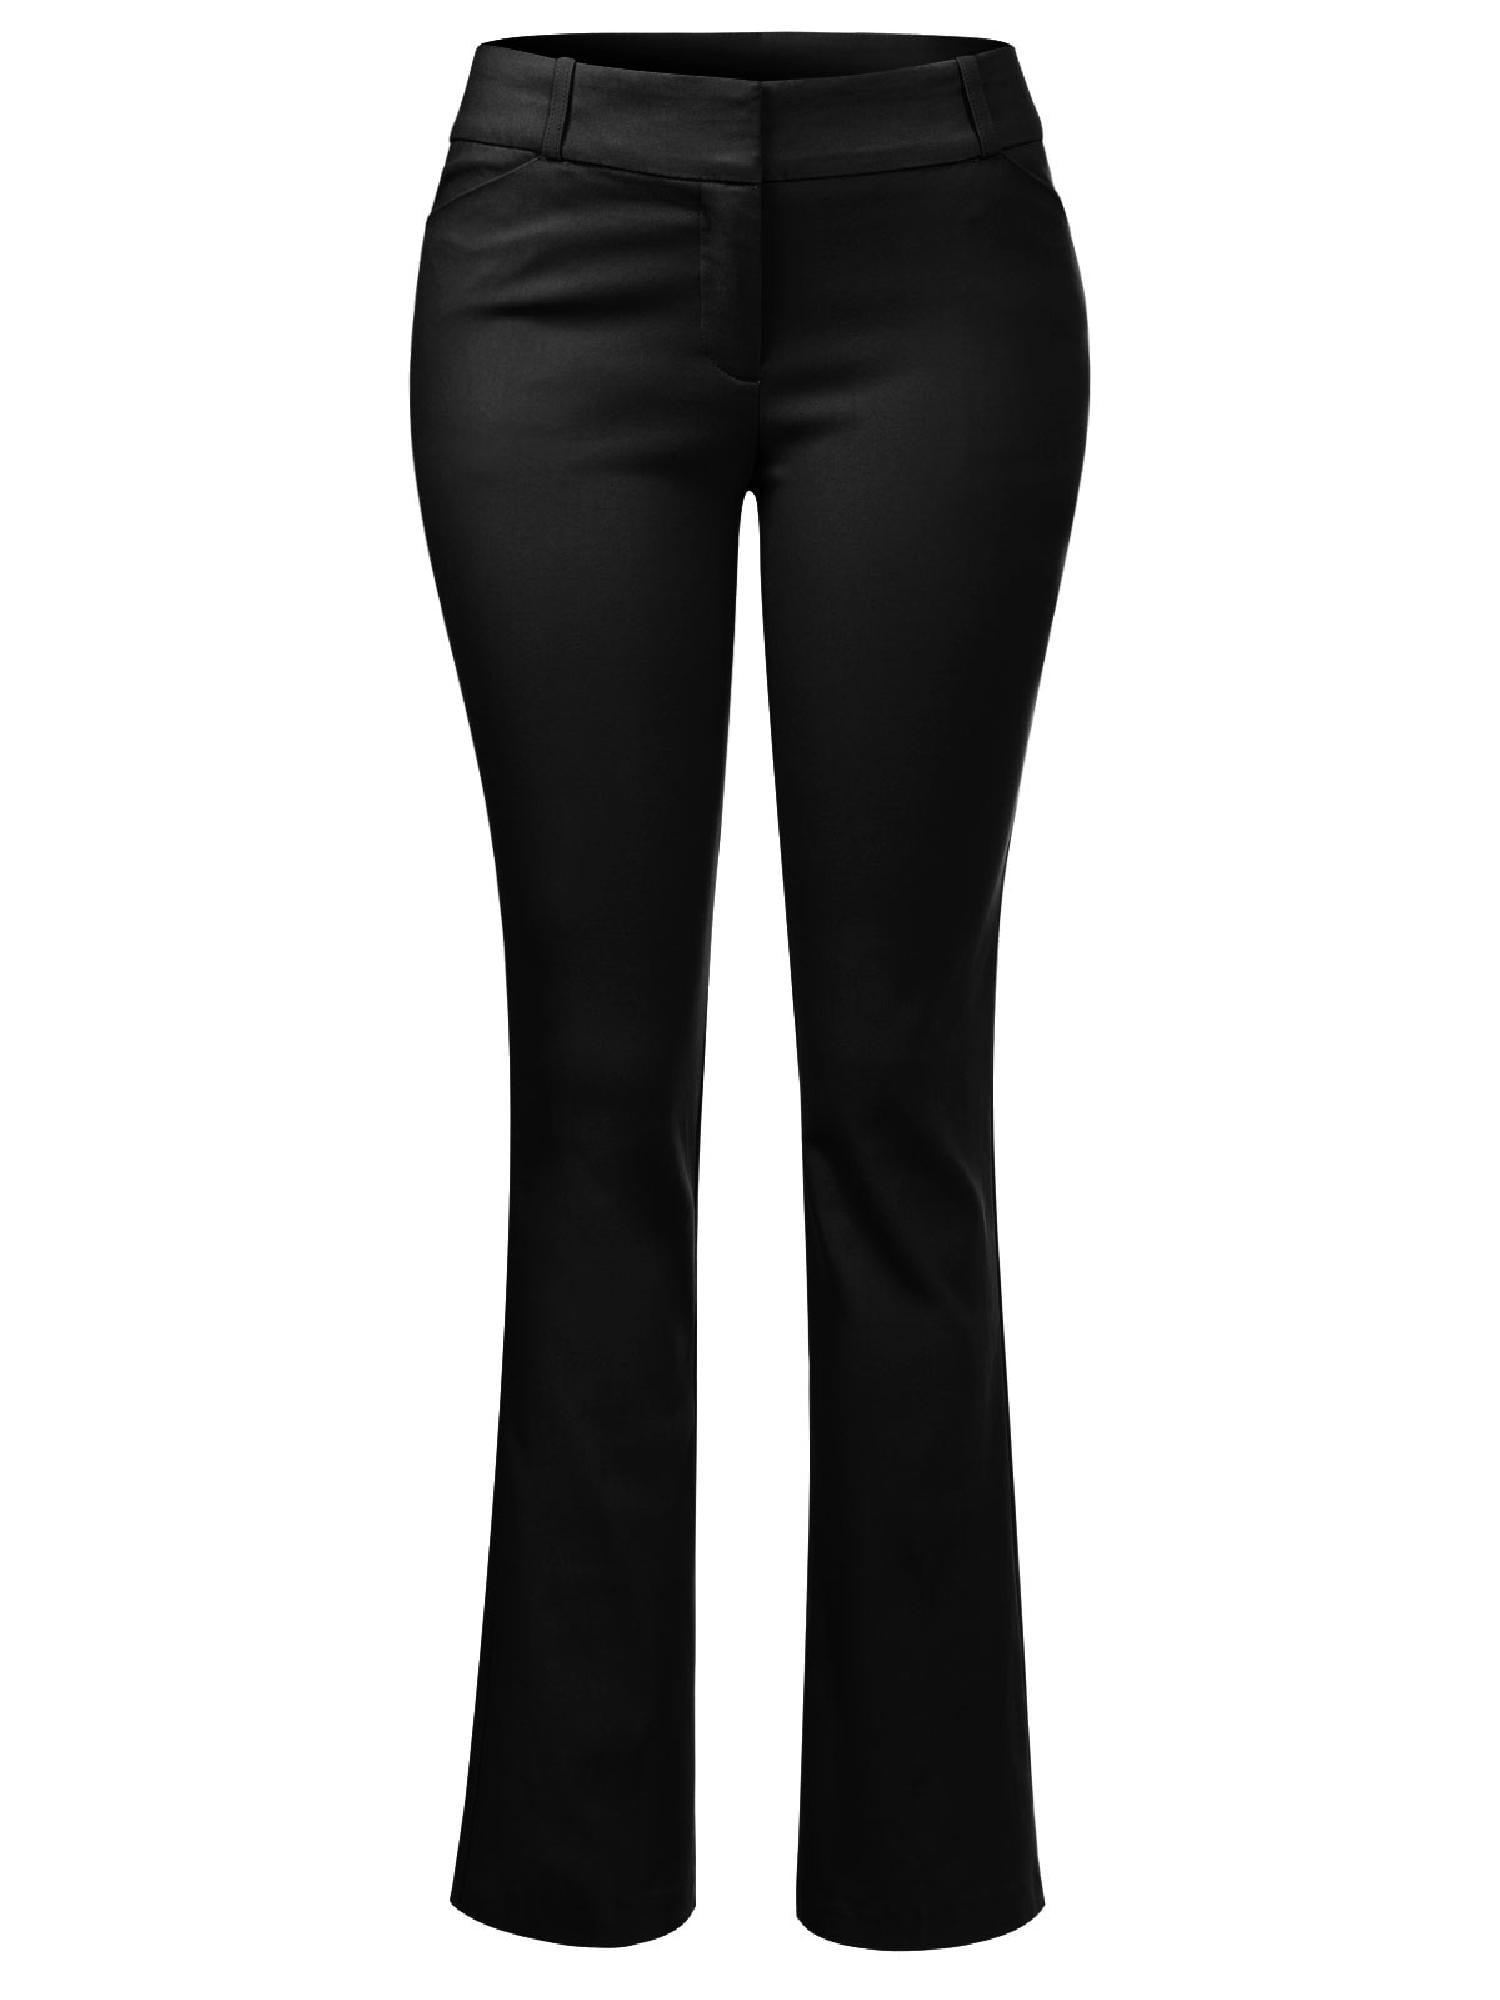 Design by Olivia Womens Comfy Bootcut Curvy Fit Trouser Pants 